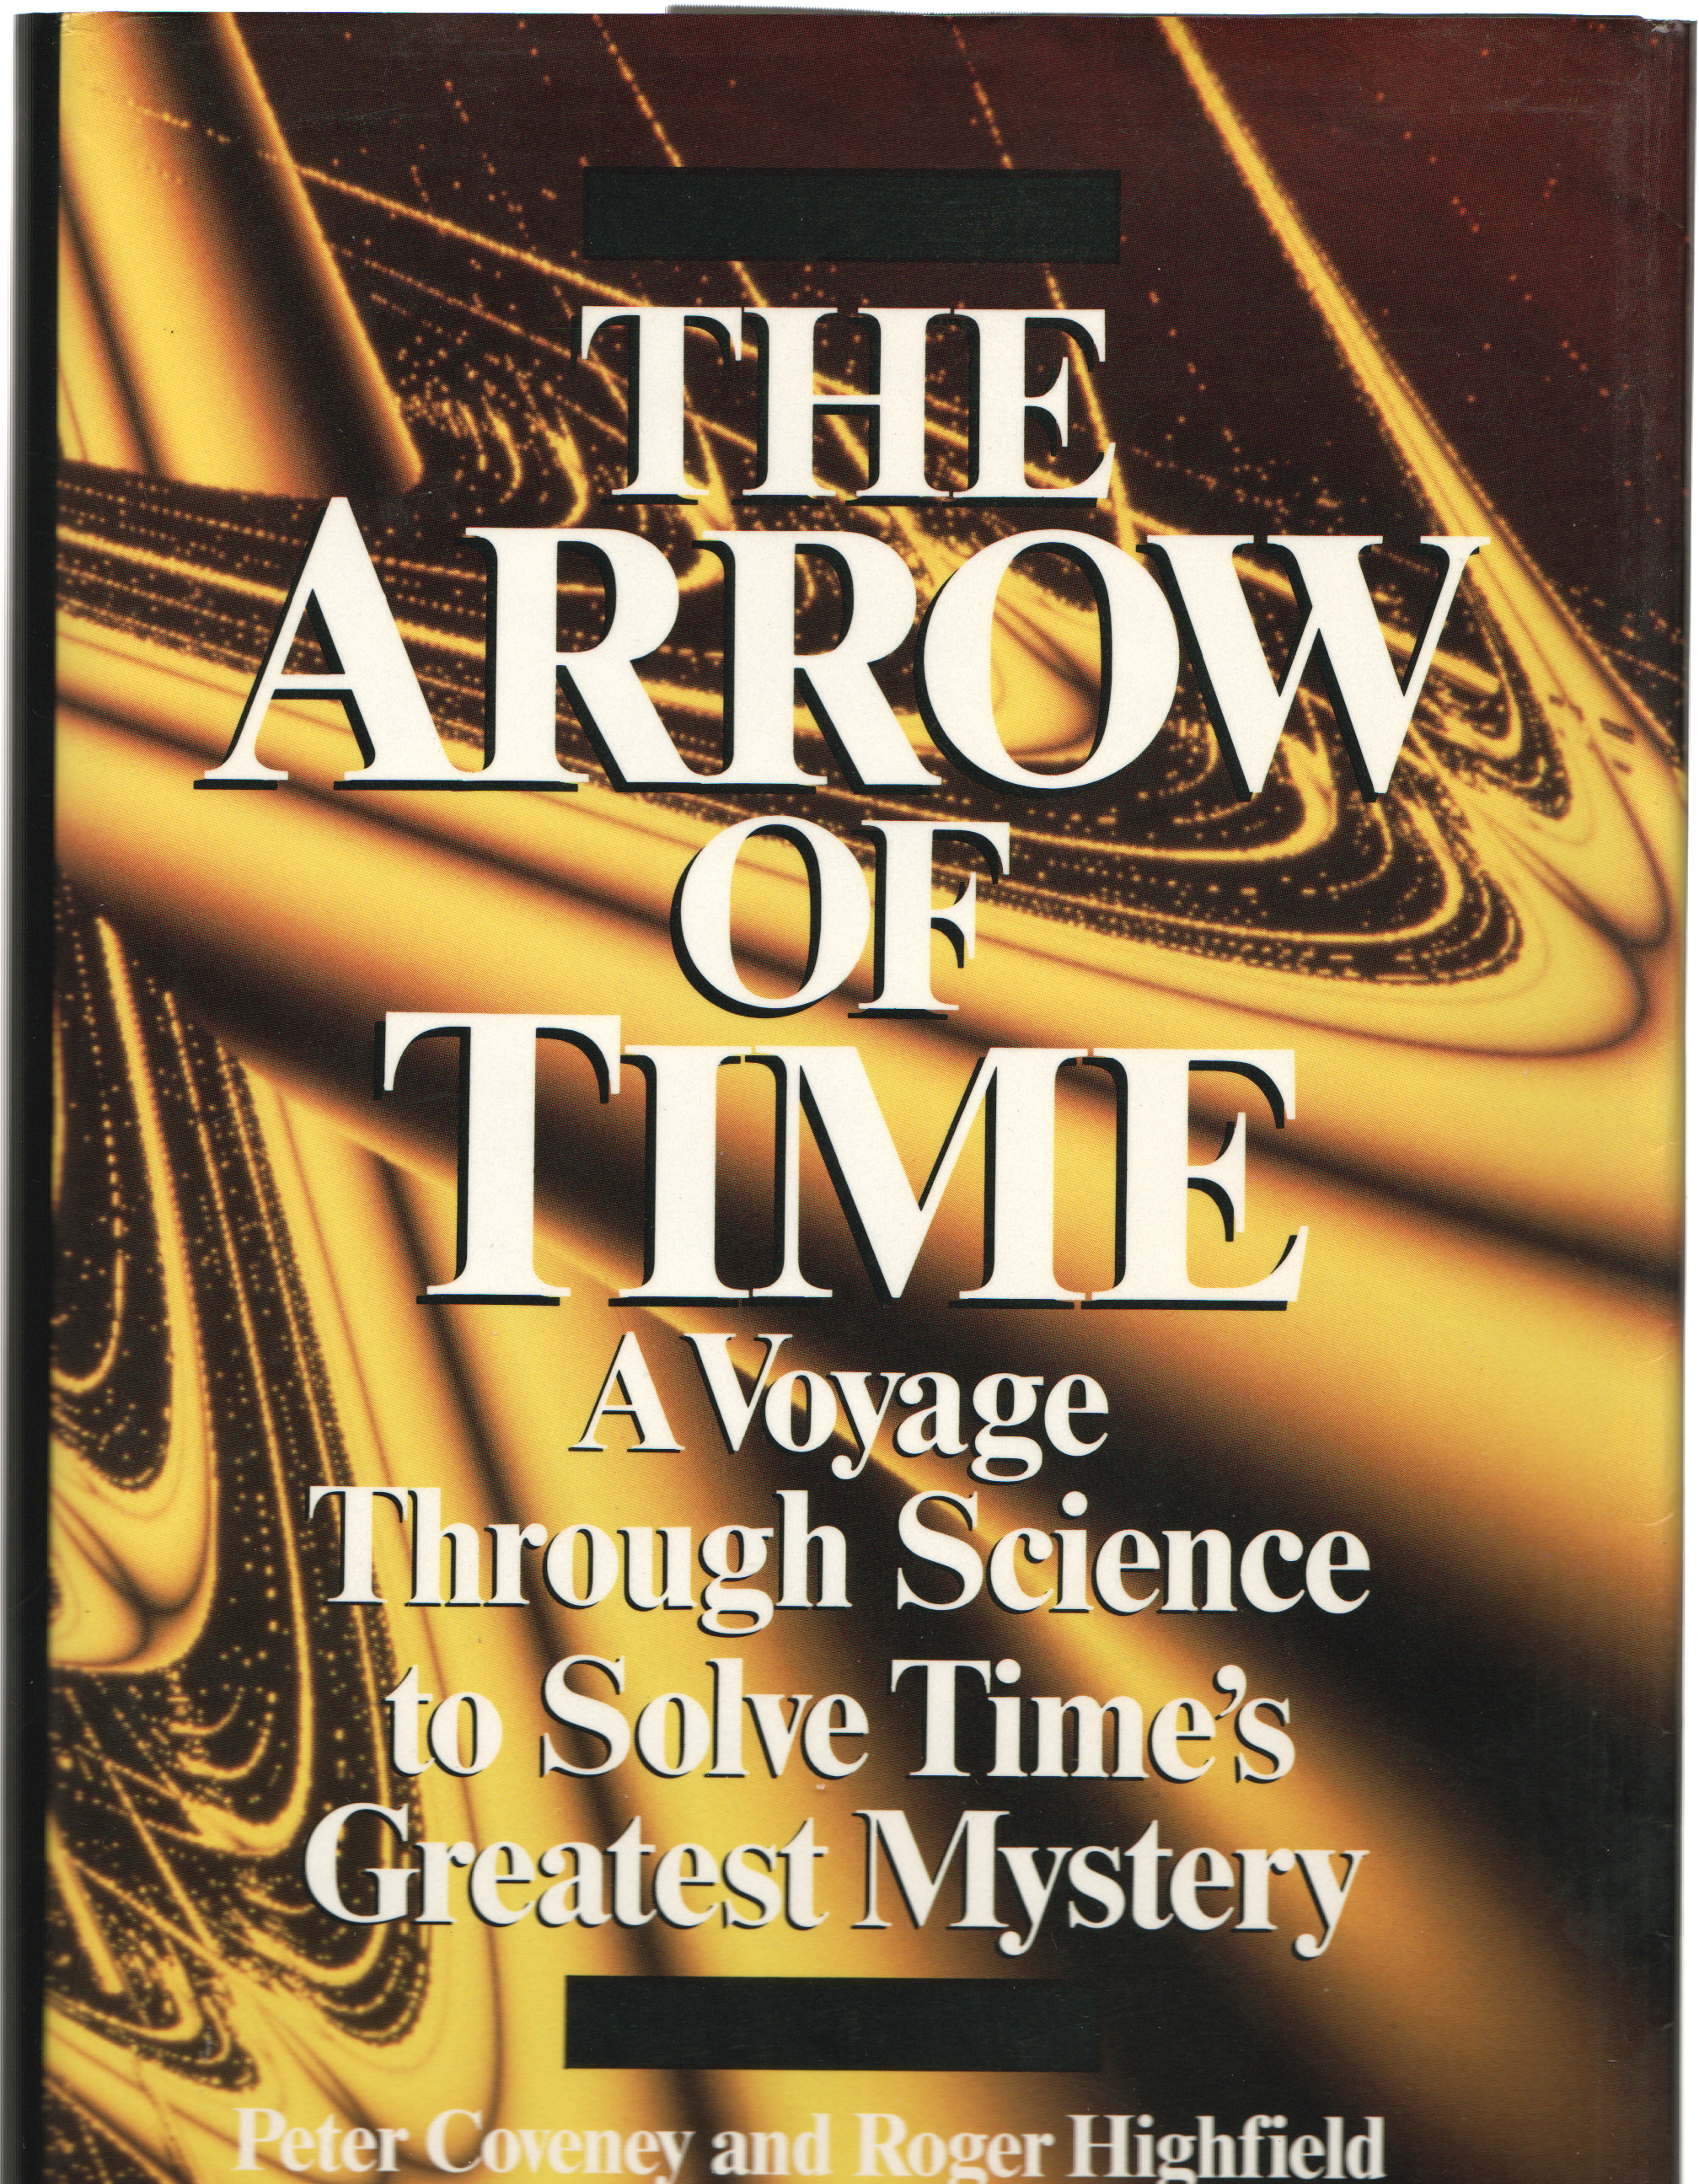 The Arrow of Time - Coveney, Peter and Roger Highfield